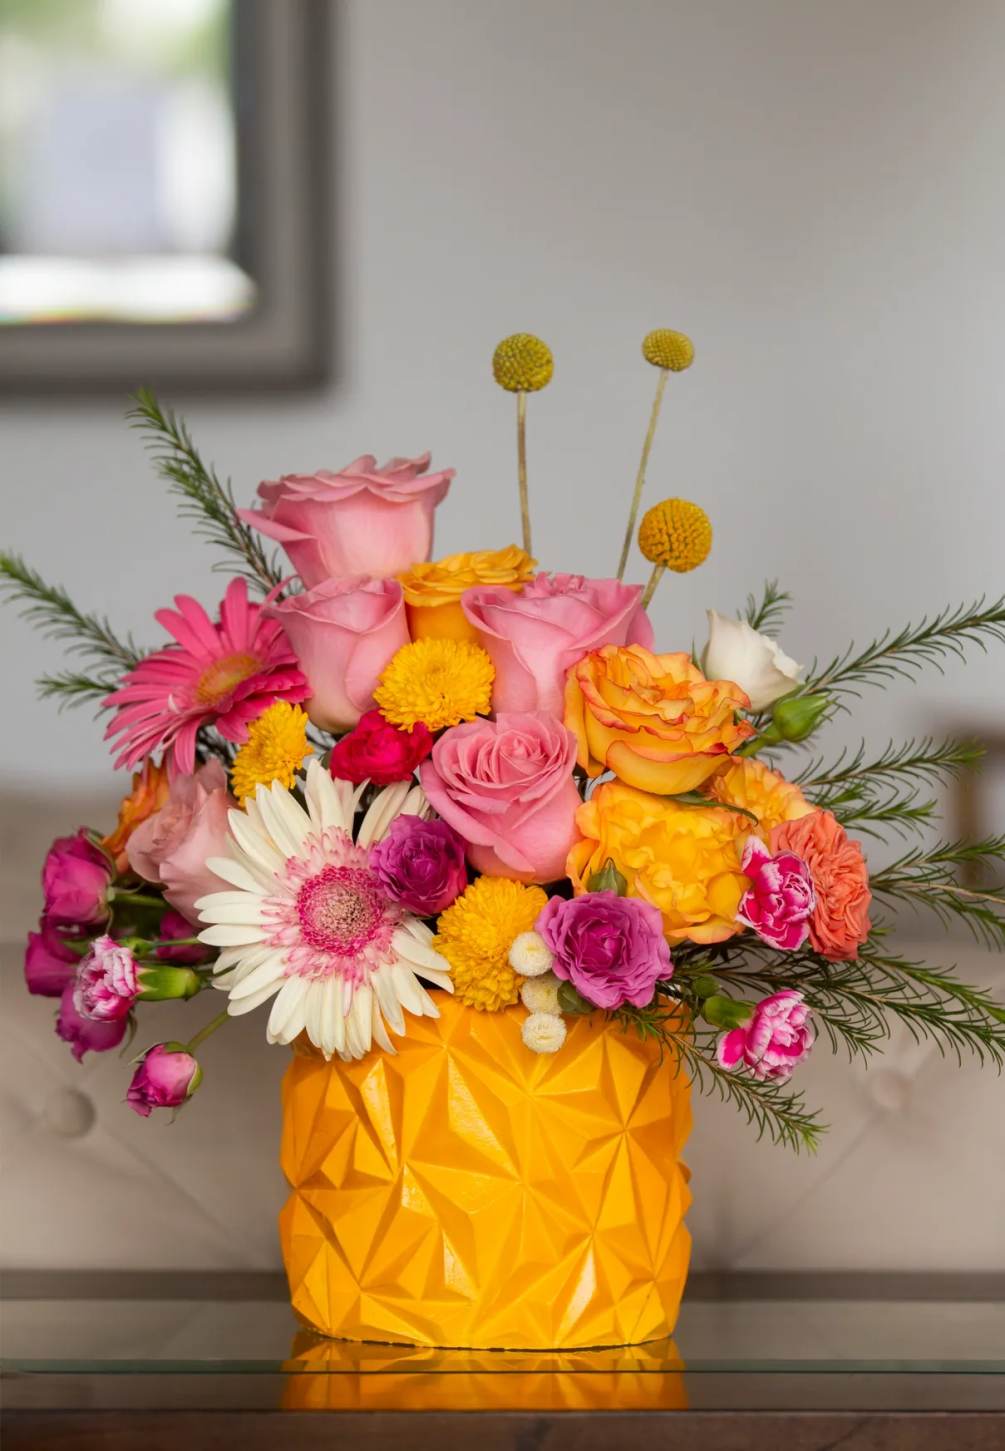 This is a stunning flower arrangement for sure will brighten anyone&#039;s day!